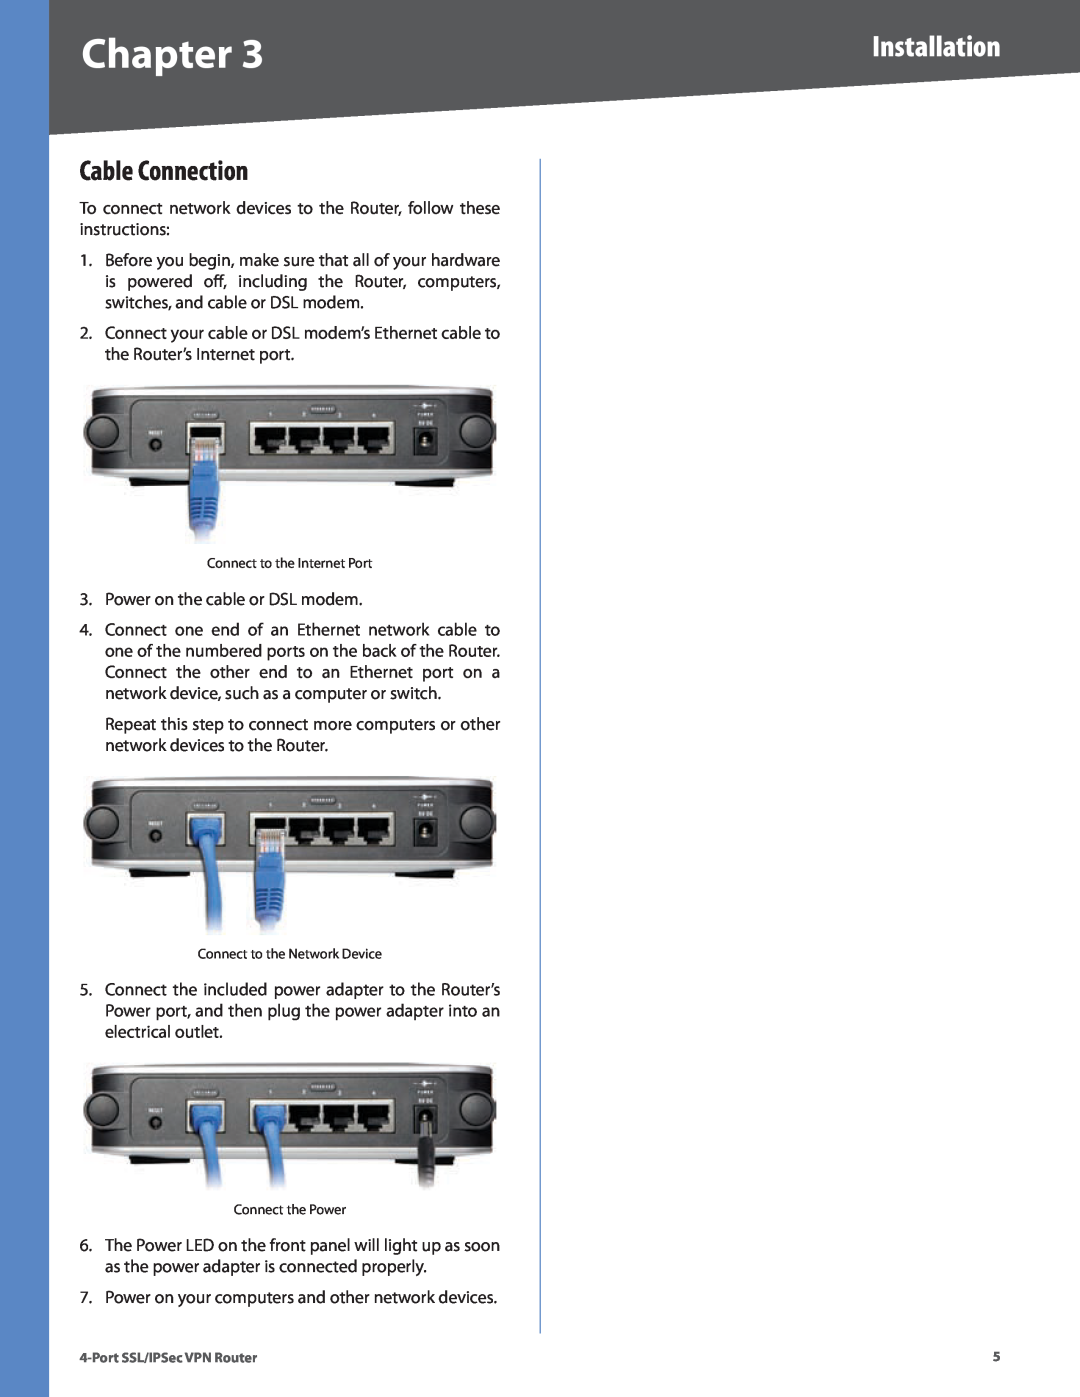 Cisco Systems RVL200 manual Cable Connection, Installation, Chapter 